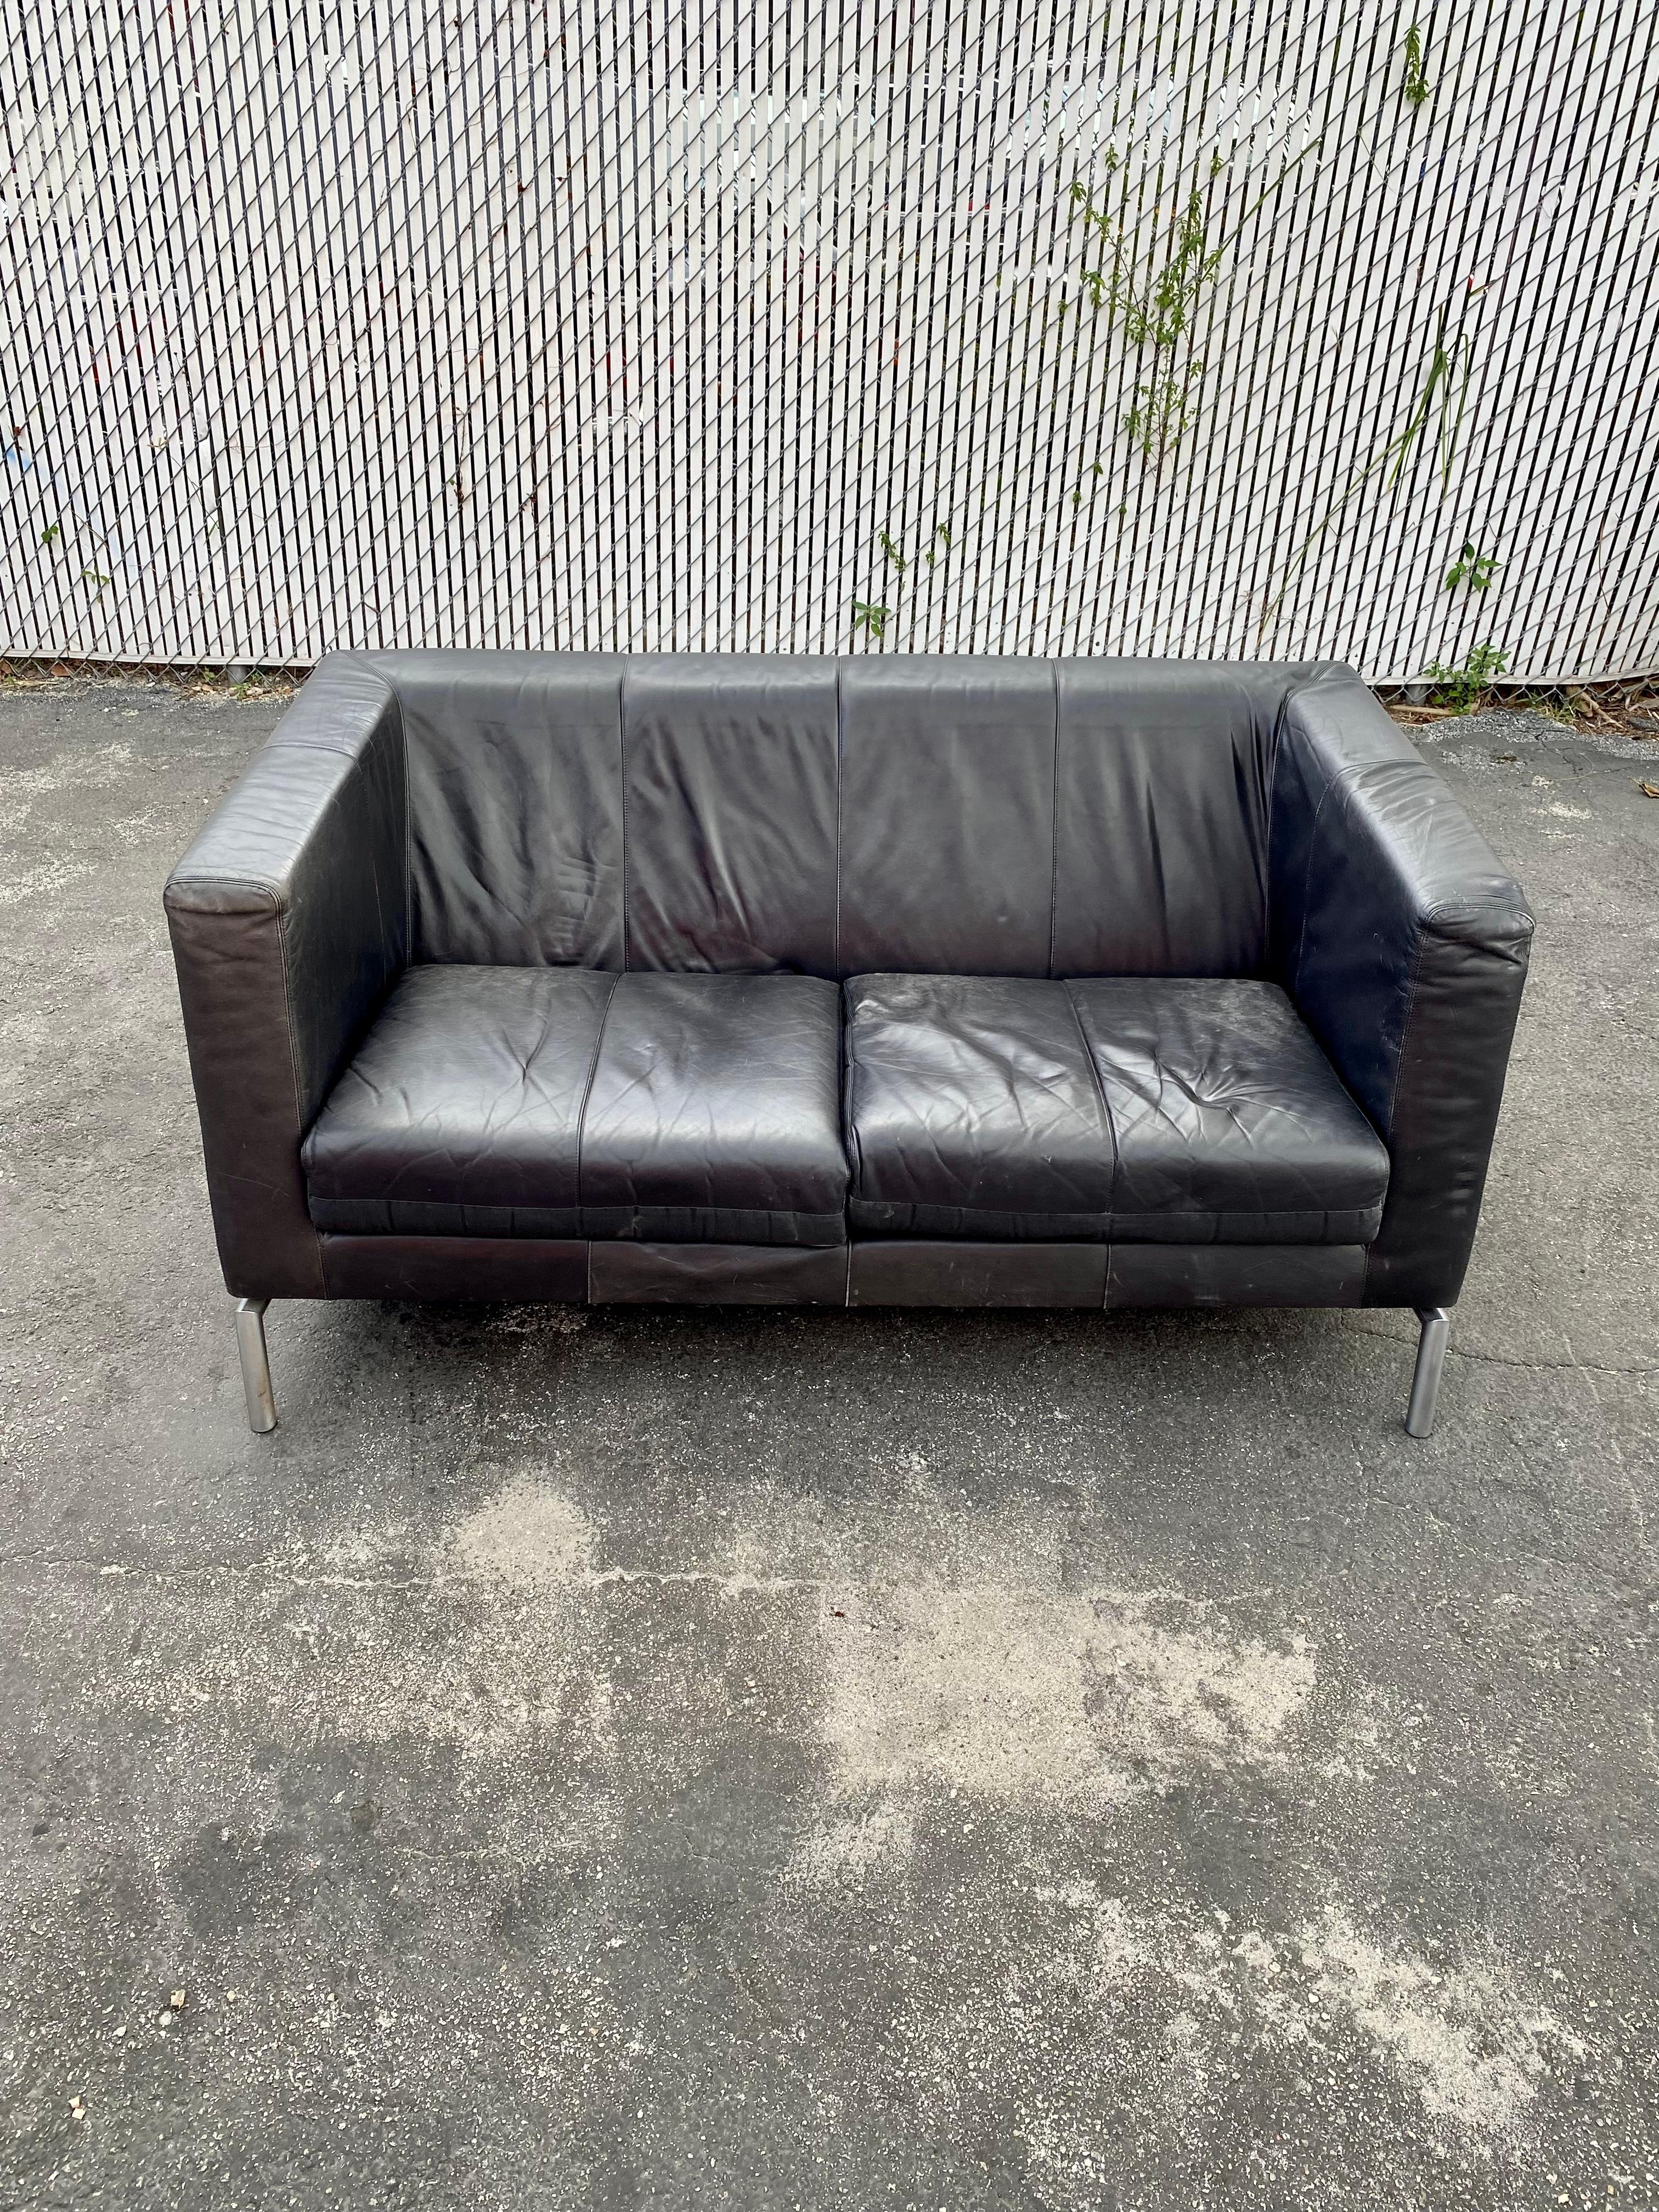 1970s Montis Chrome Black Leather Wegner Style Loveseat Sofa In Good Condition For Sale In Fort Lauderdale, FL